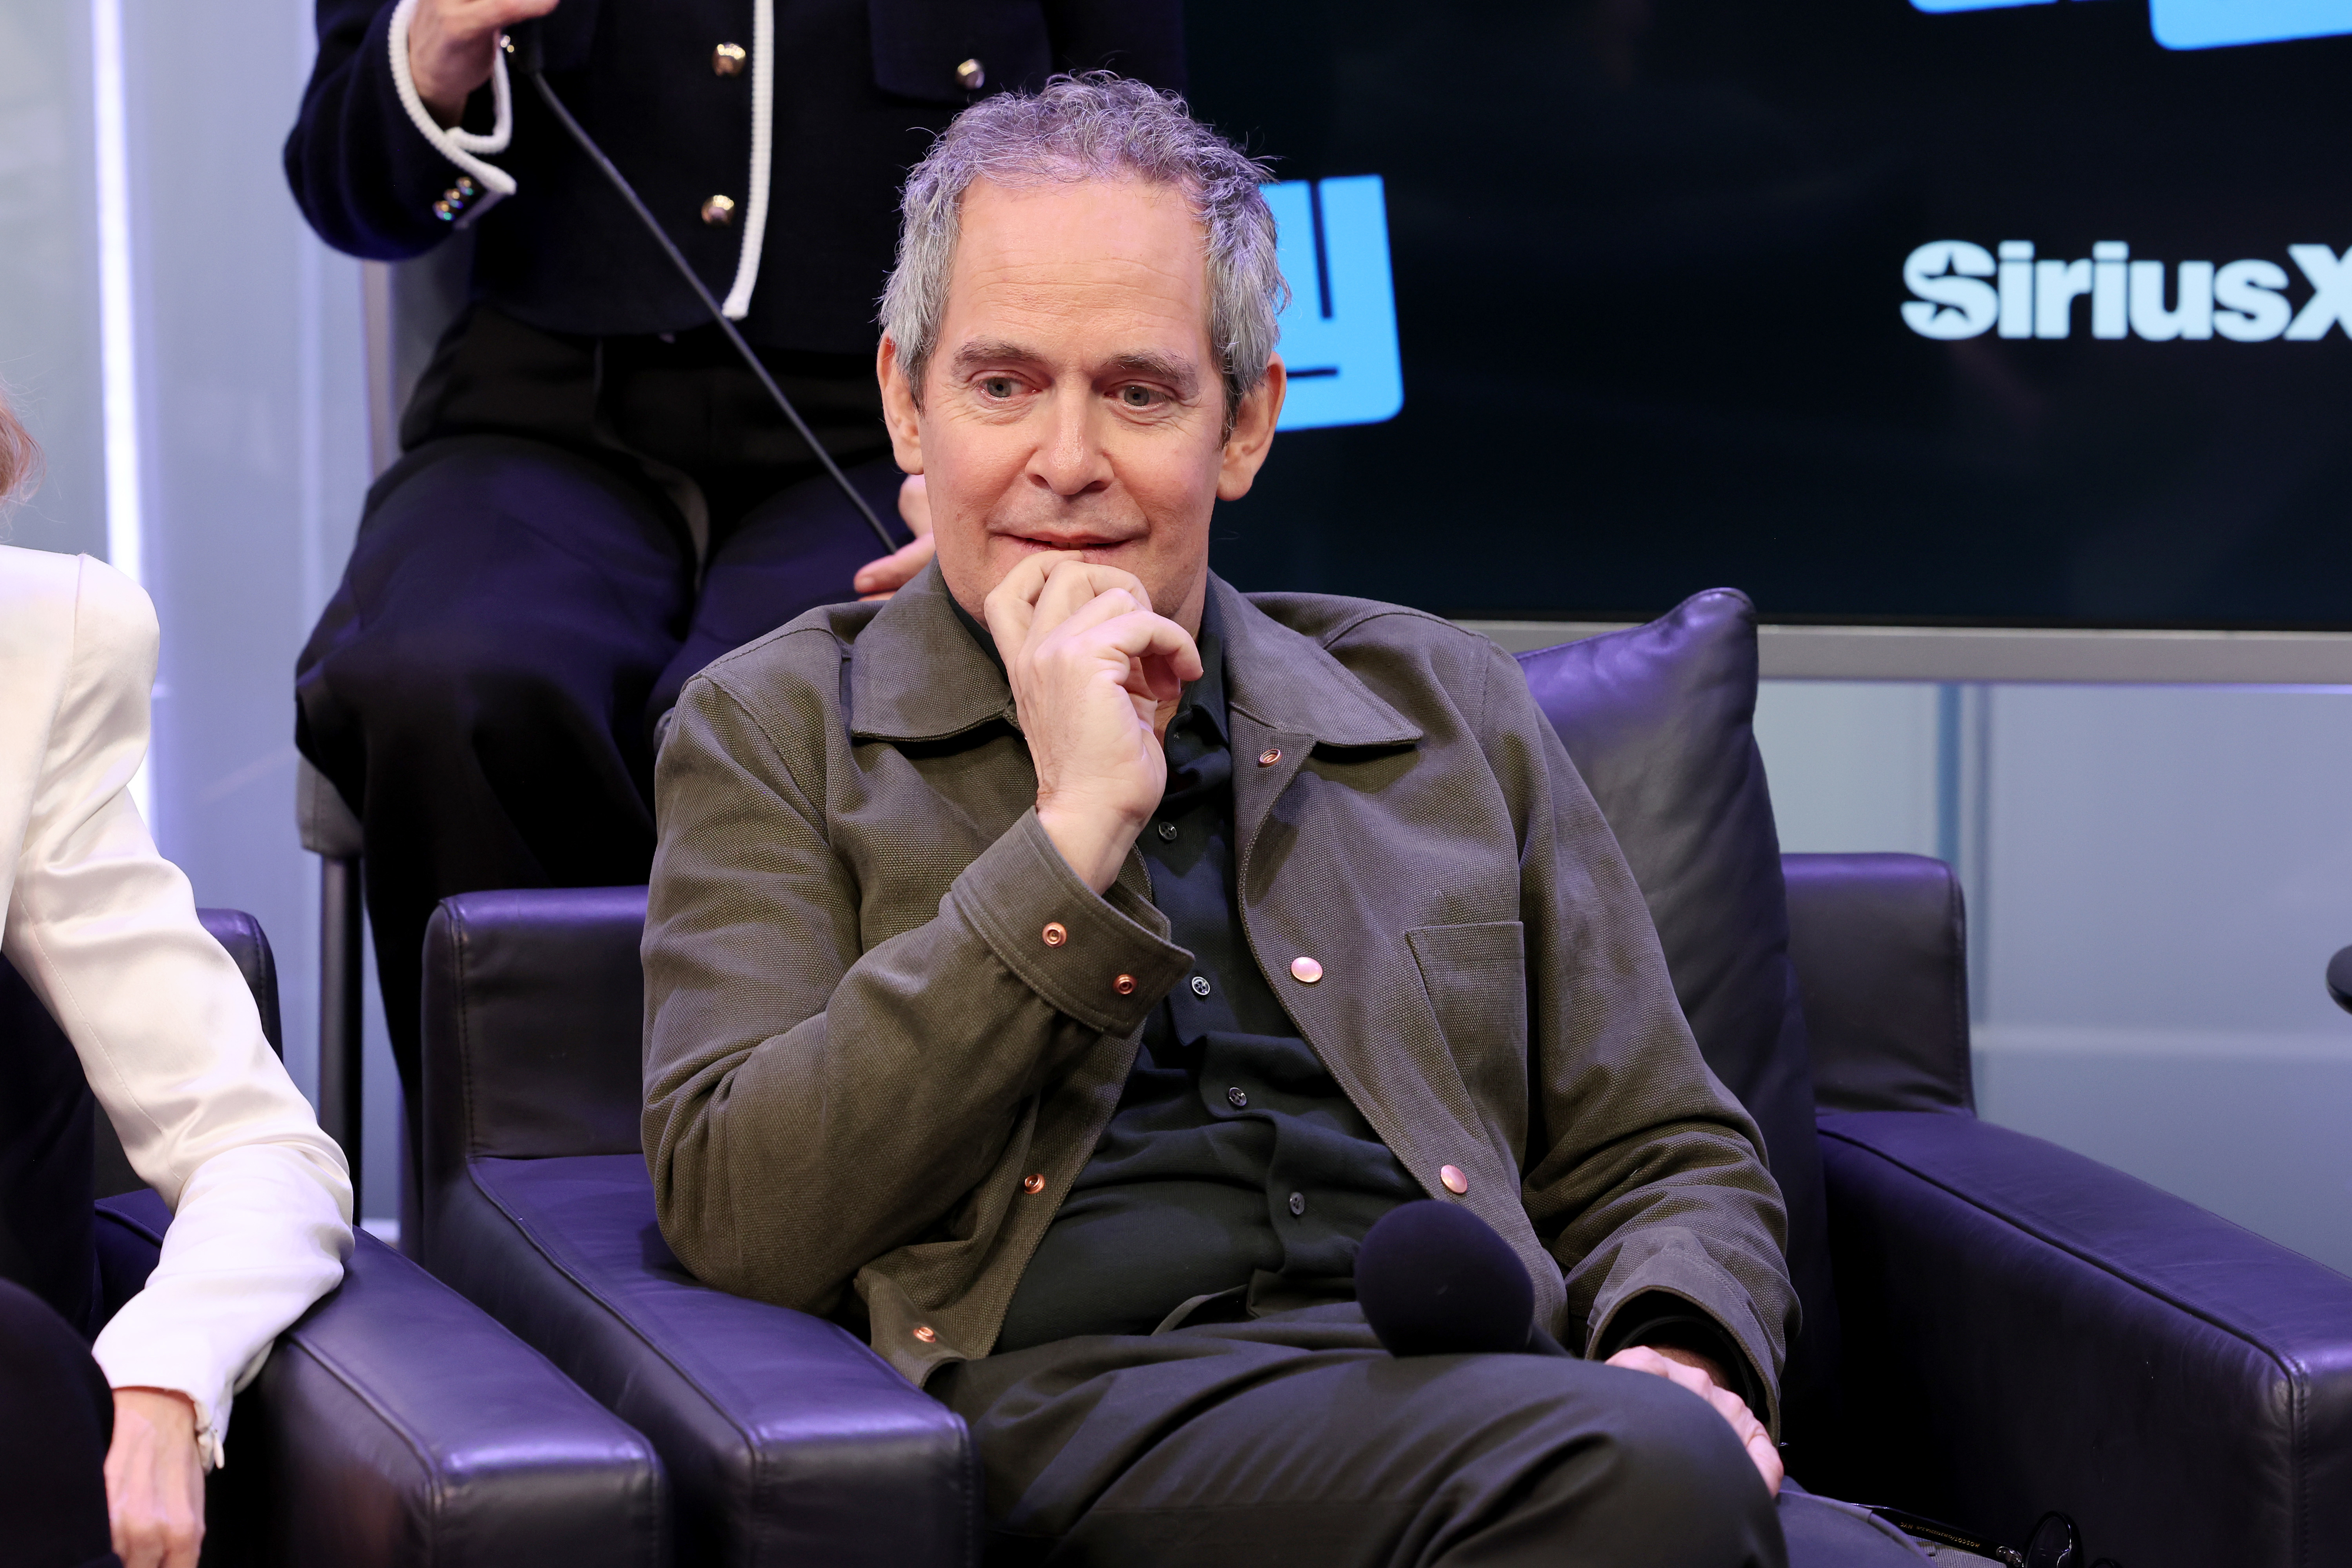 Close-up of Tom Hollander sitting and smiling at the SiriusX studios